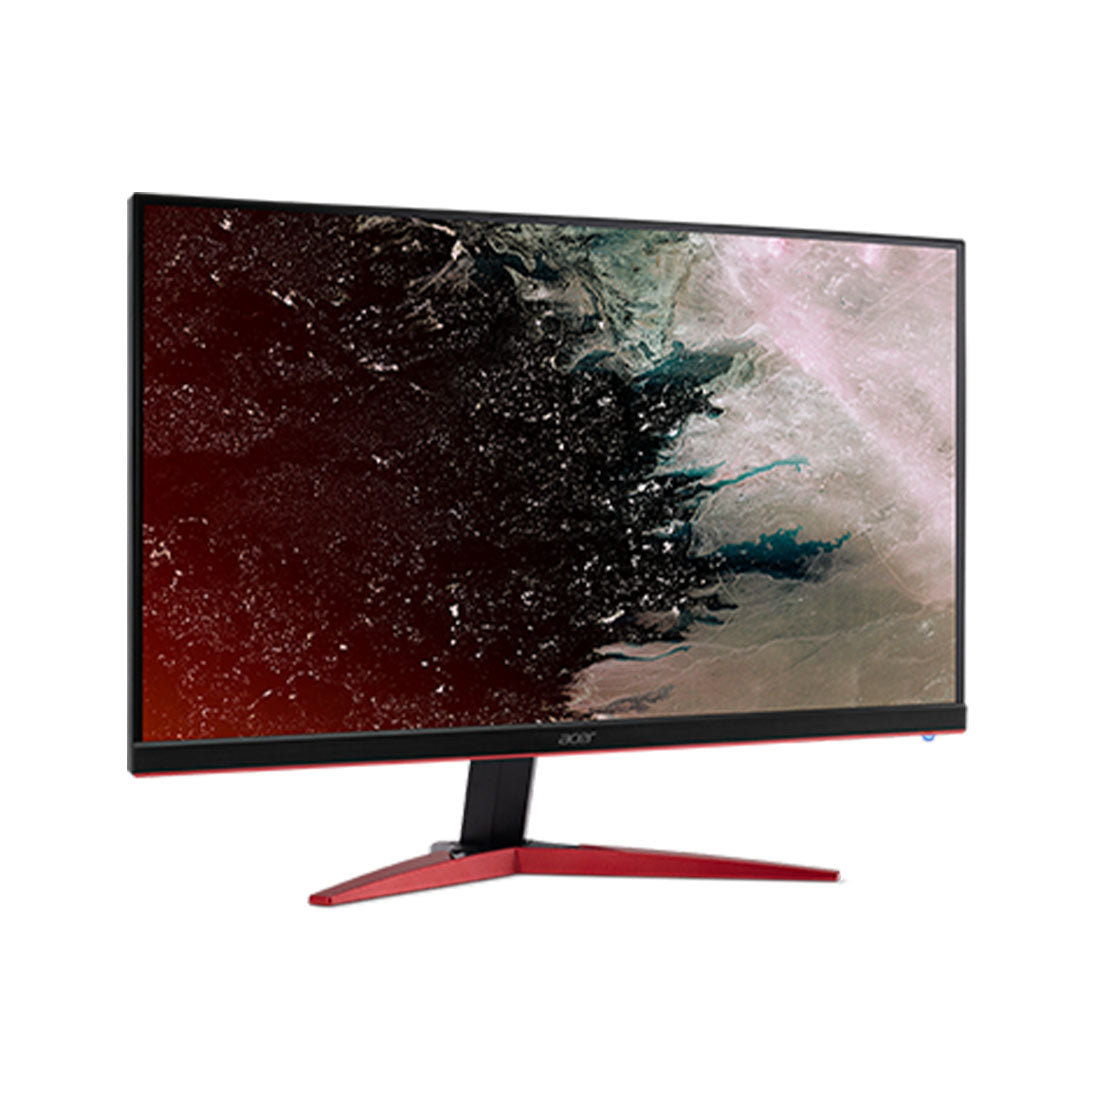 Acer KG271 27-Inch Full HD TN Monitor with 144Hz Refresh Rate AMD FreeSync and 2W Dual Speakers